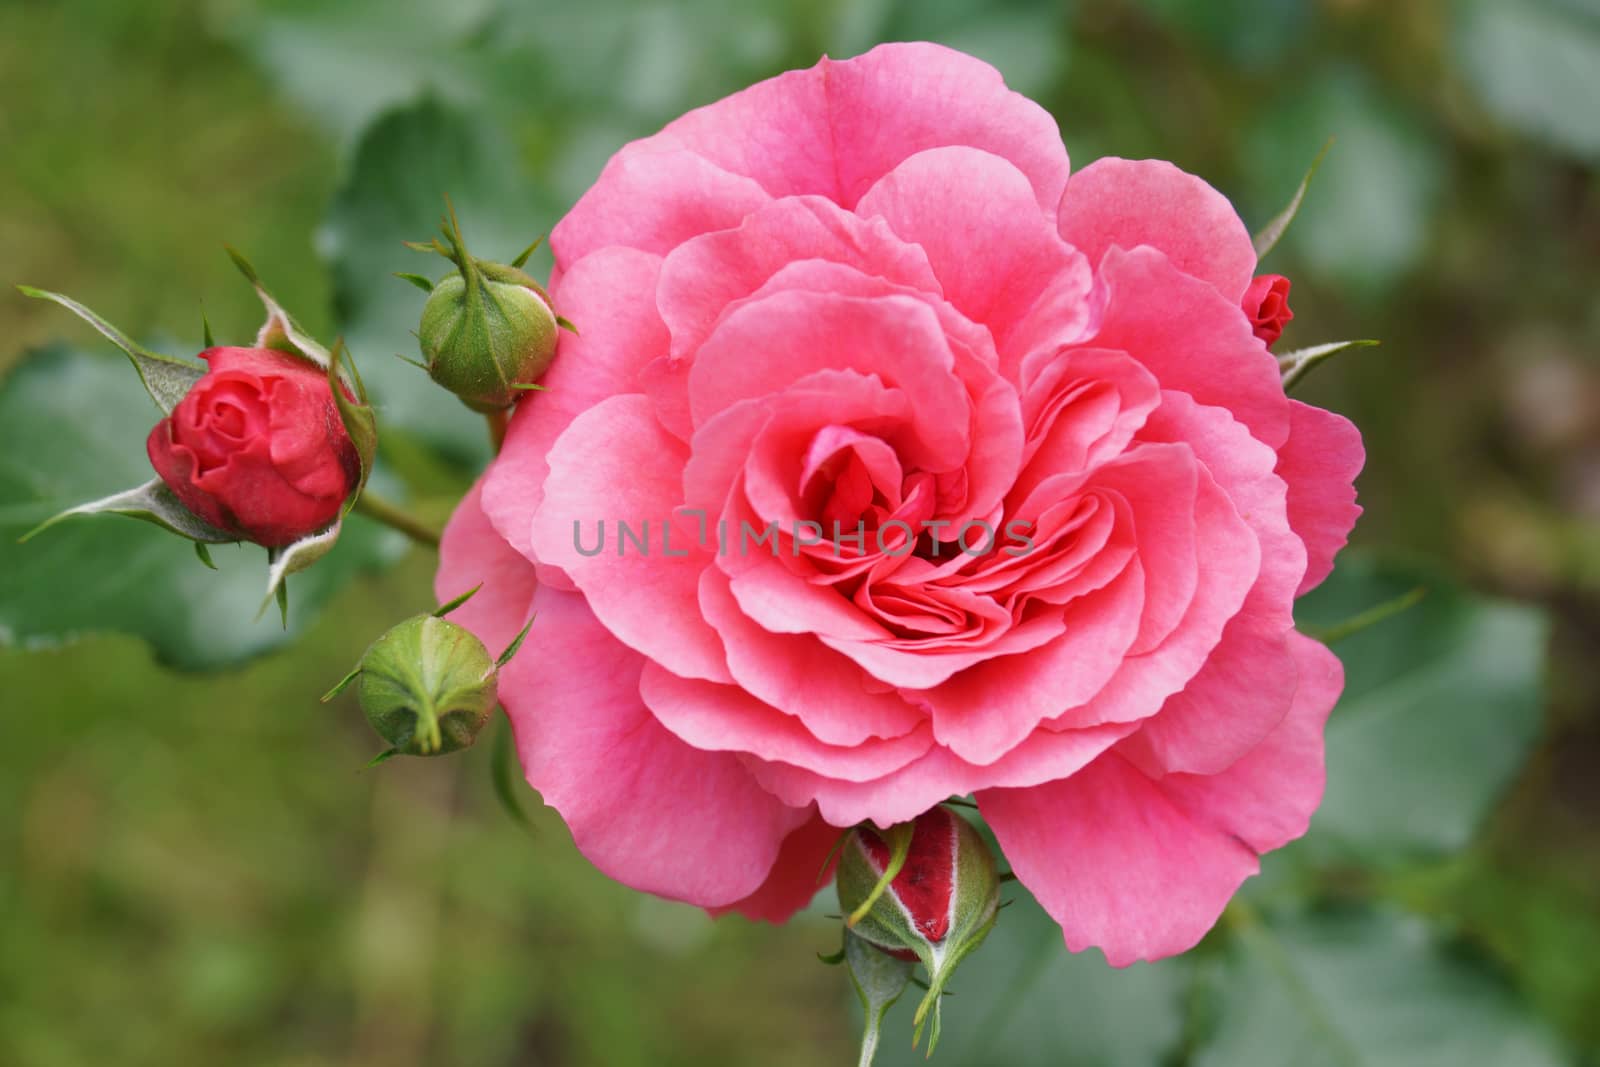 The photograph shows a blooming red rose